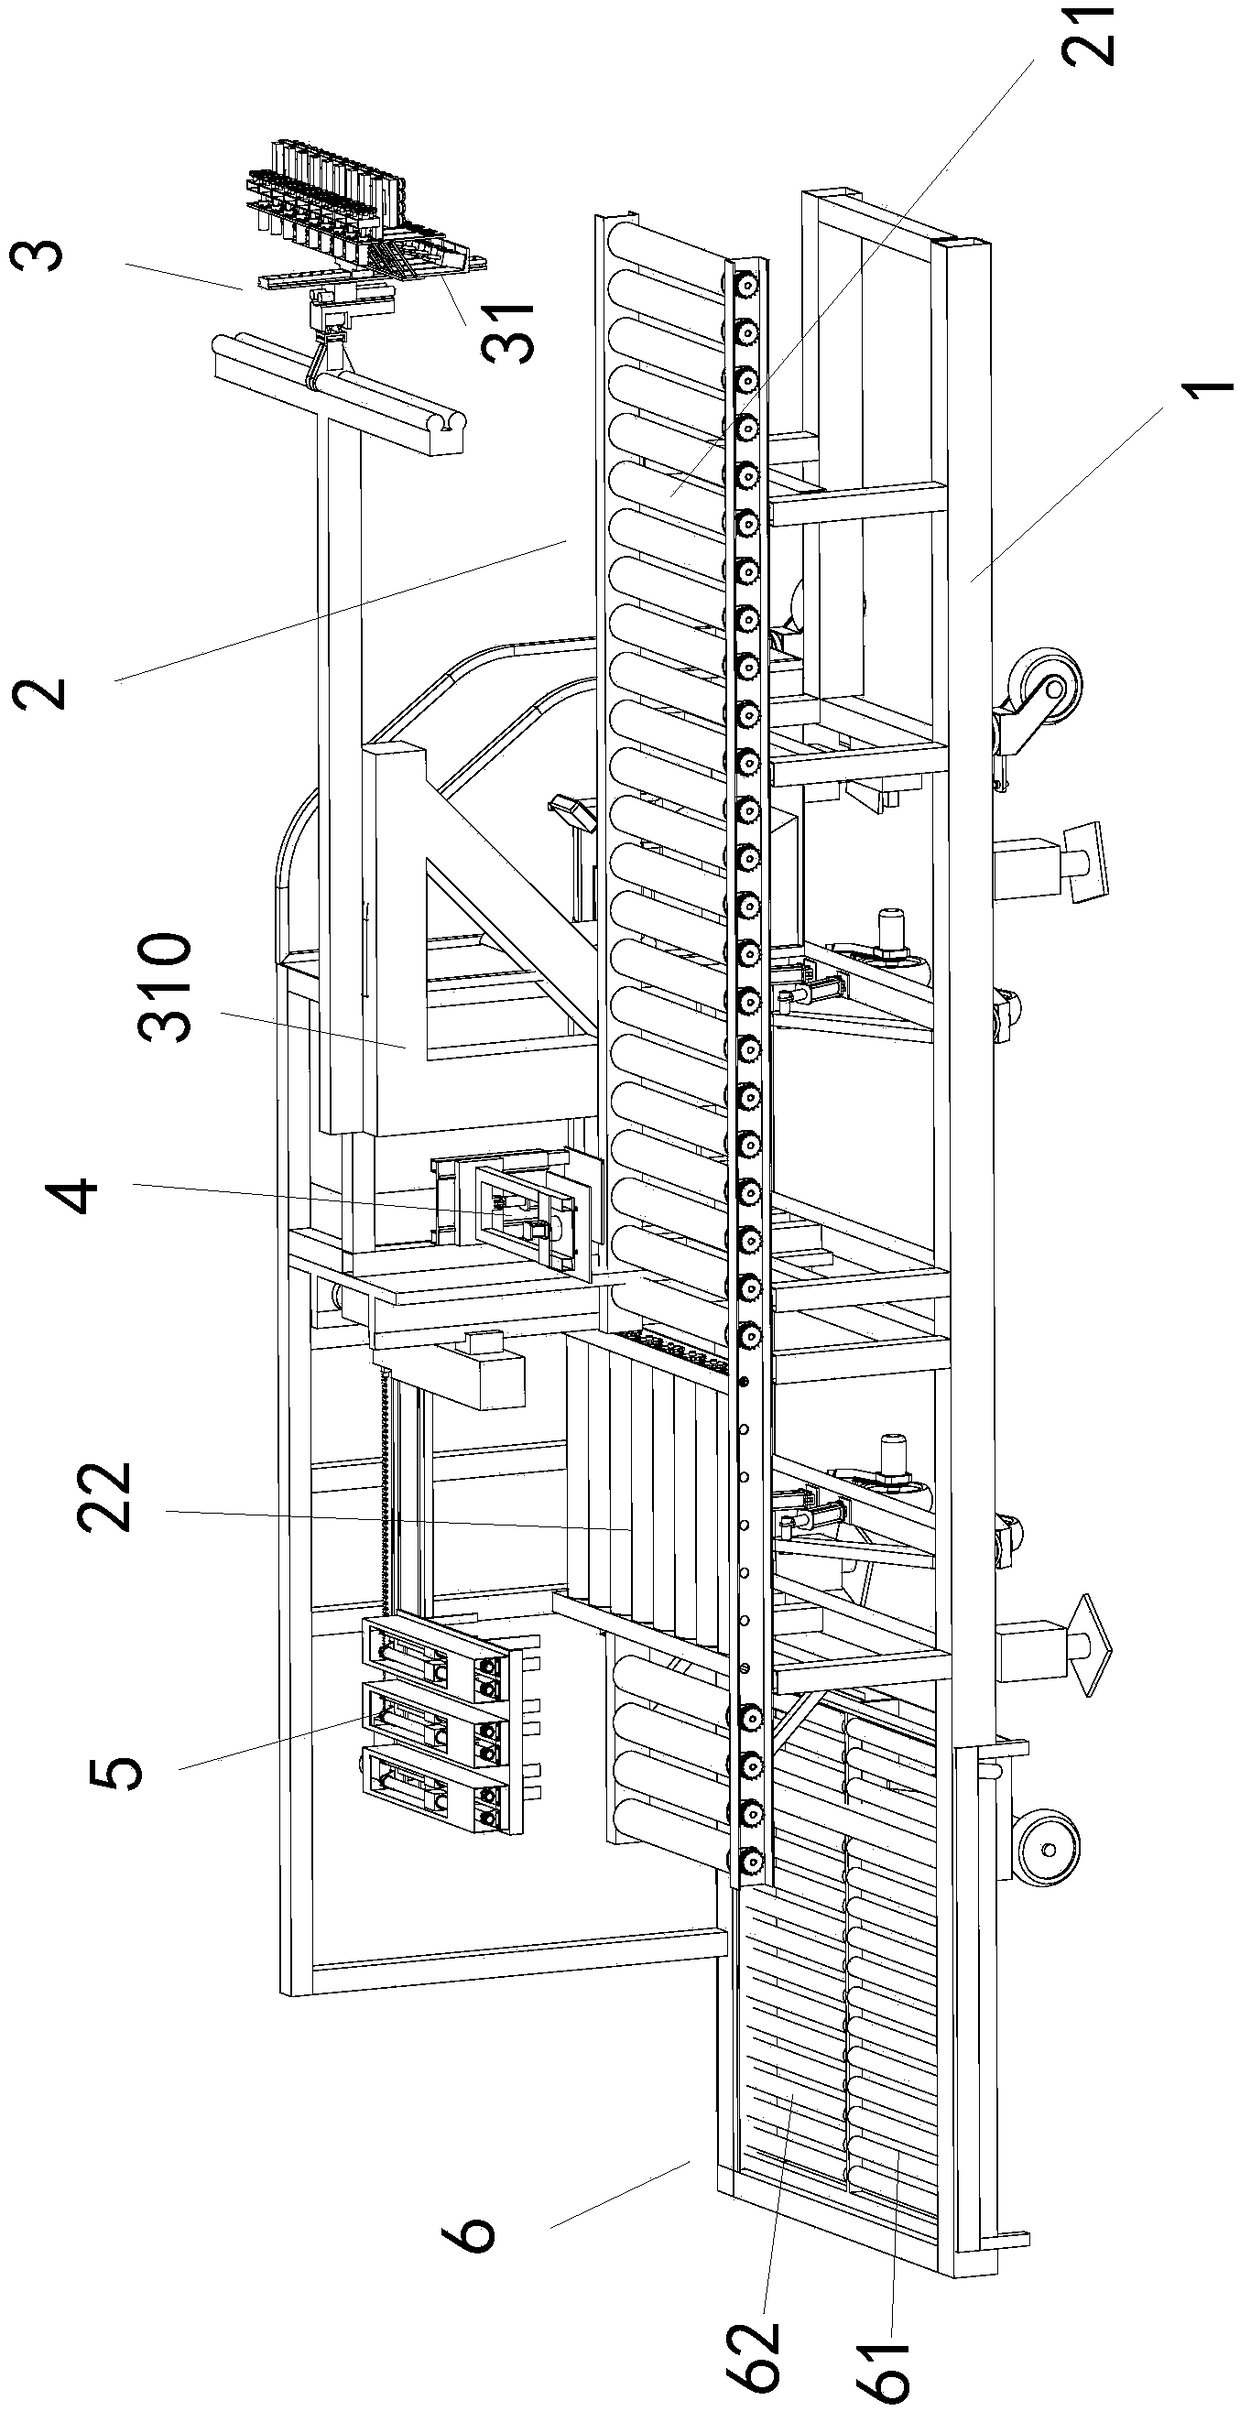 Intelligent loading and unloading device for containerized goods